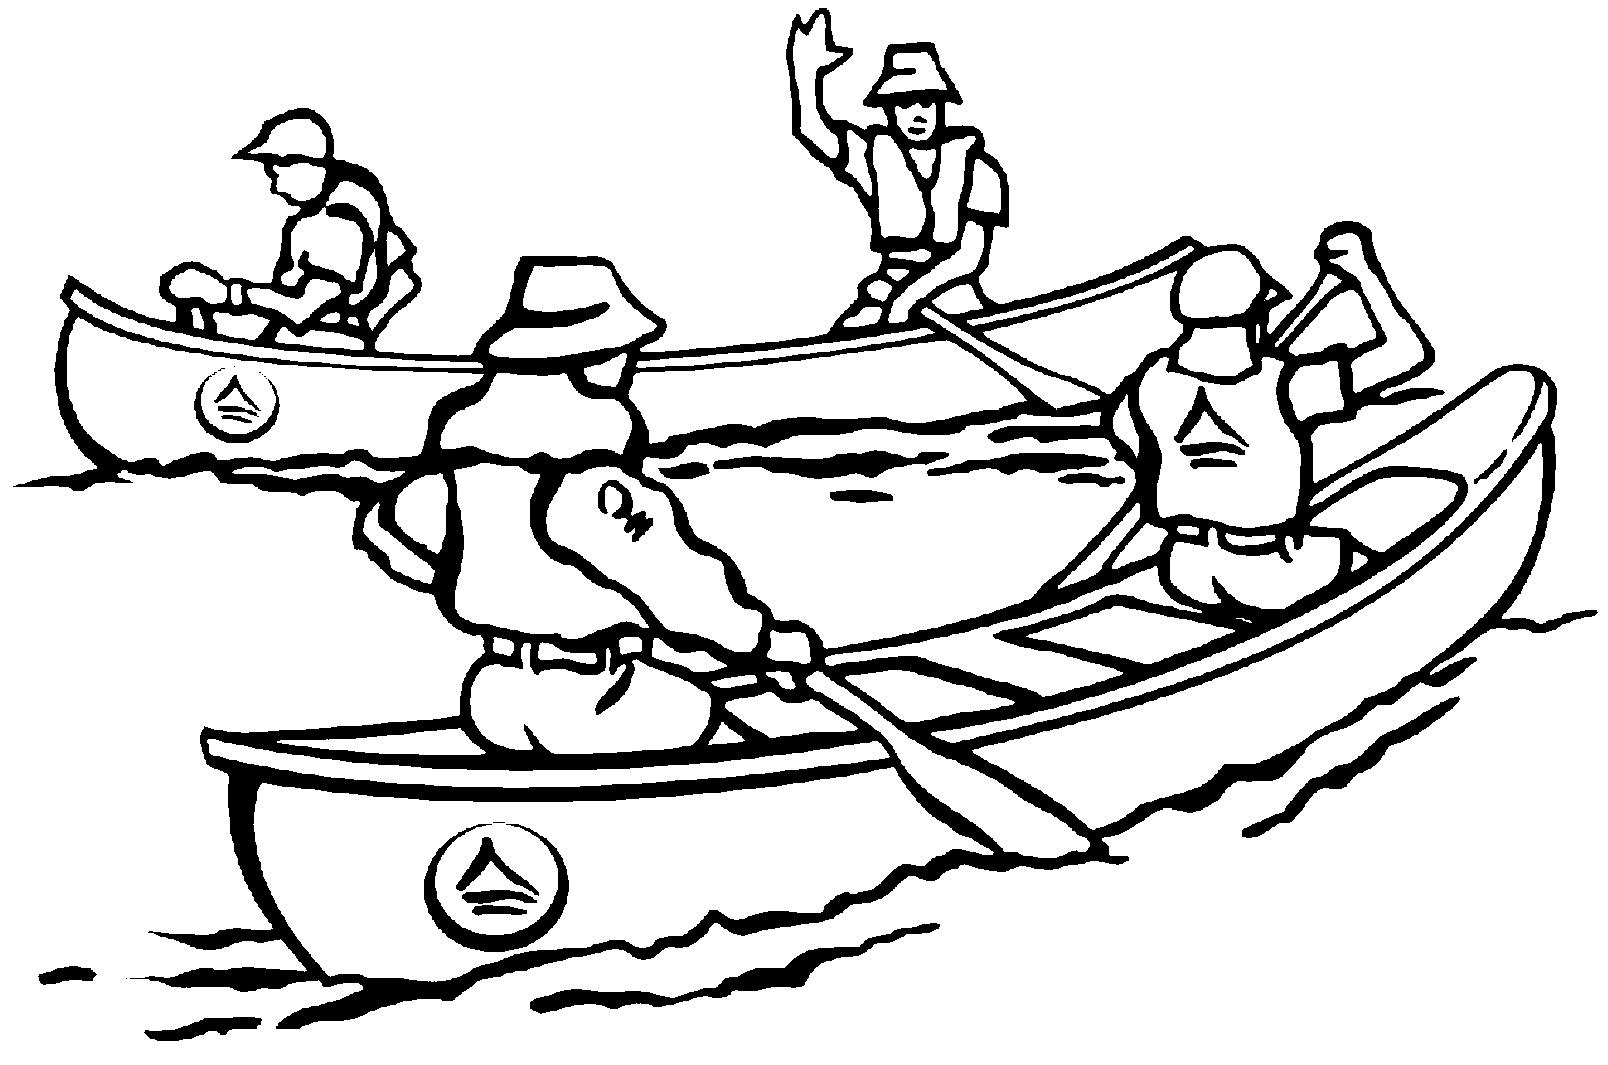 Kayaking clipart colouring page, Kayaking colouring page Transparent